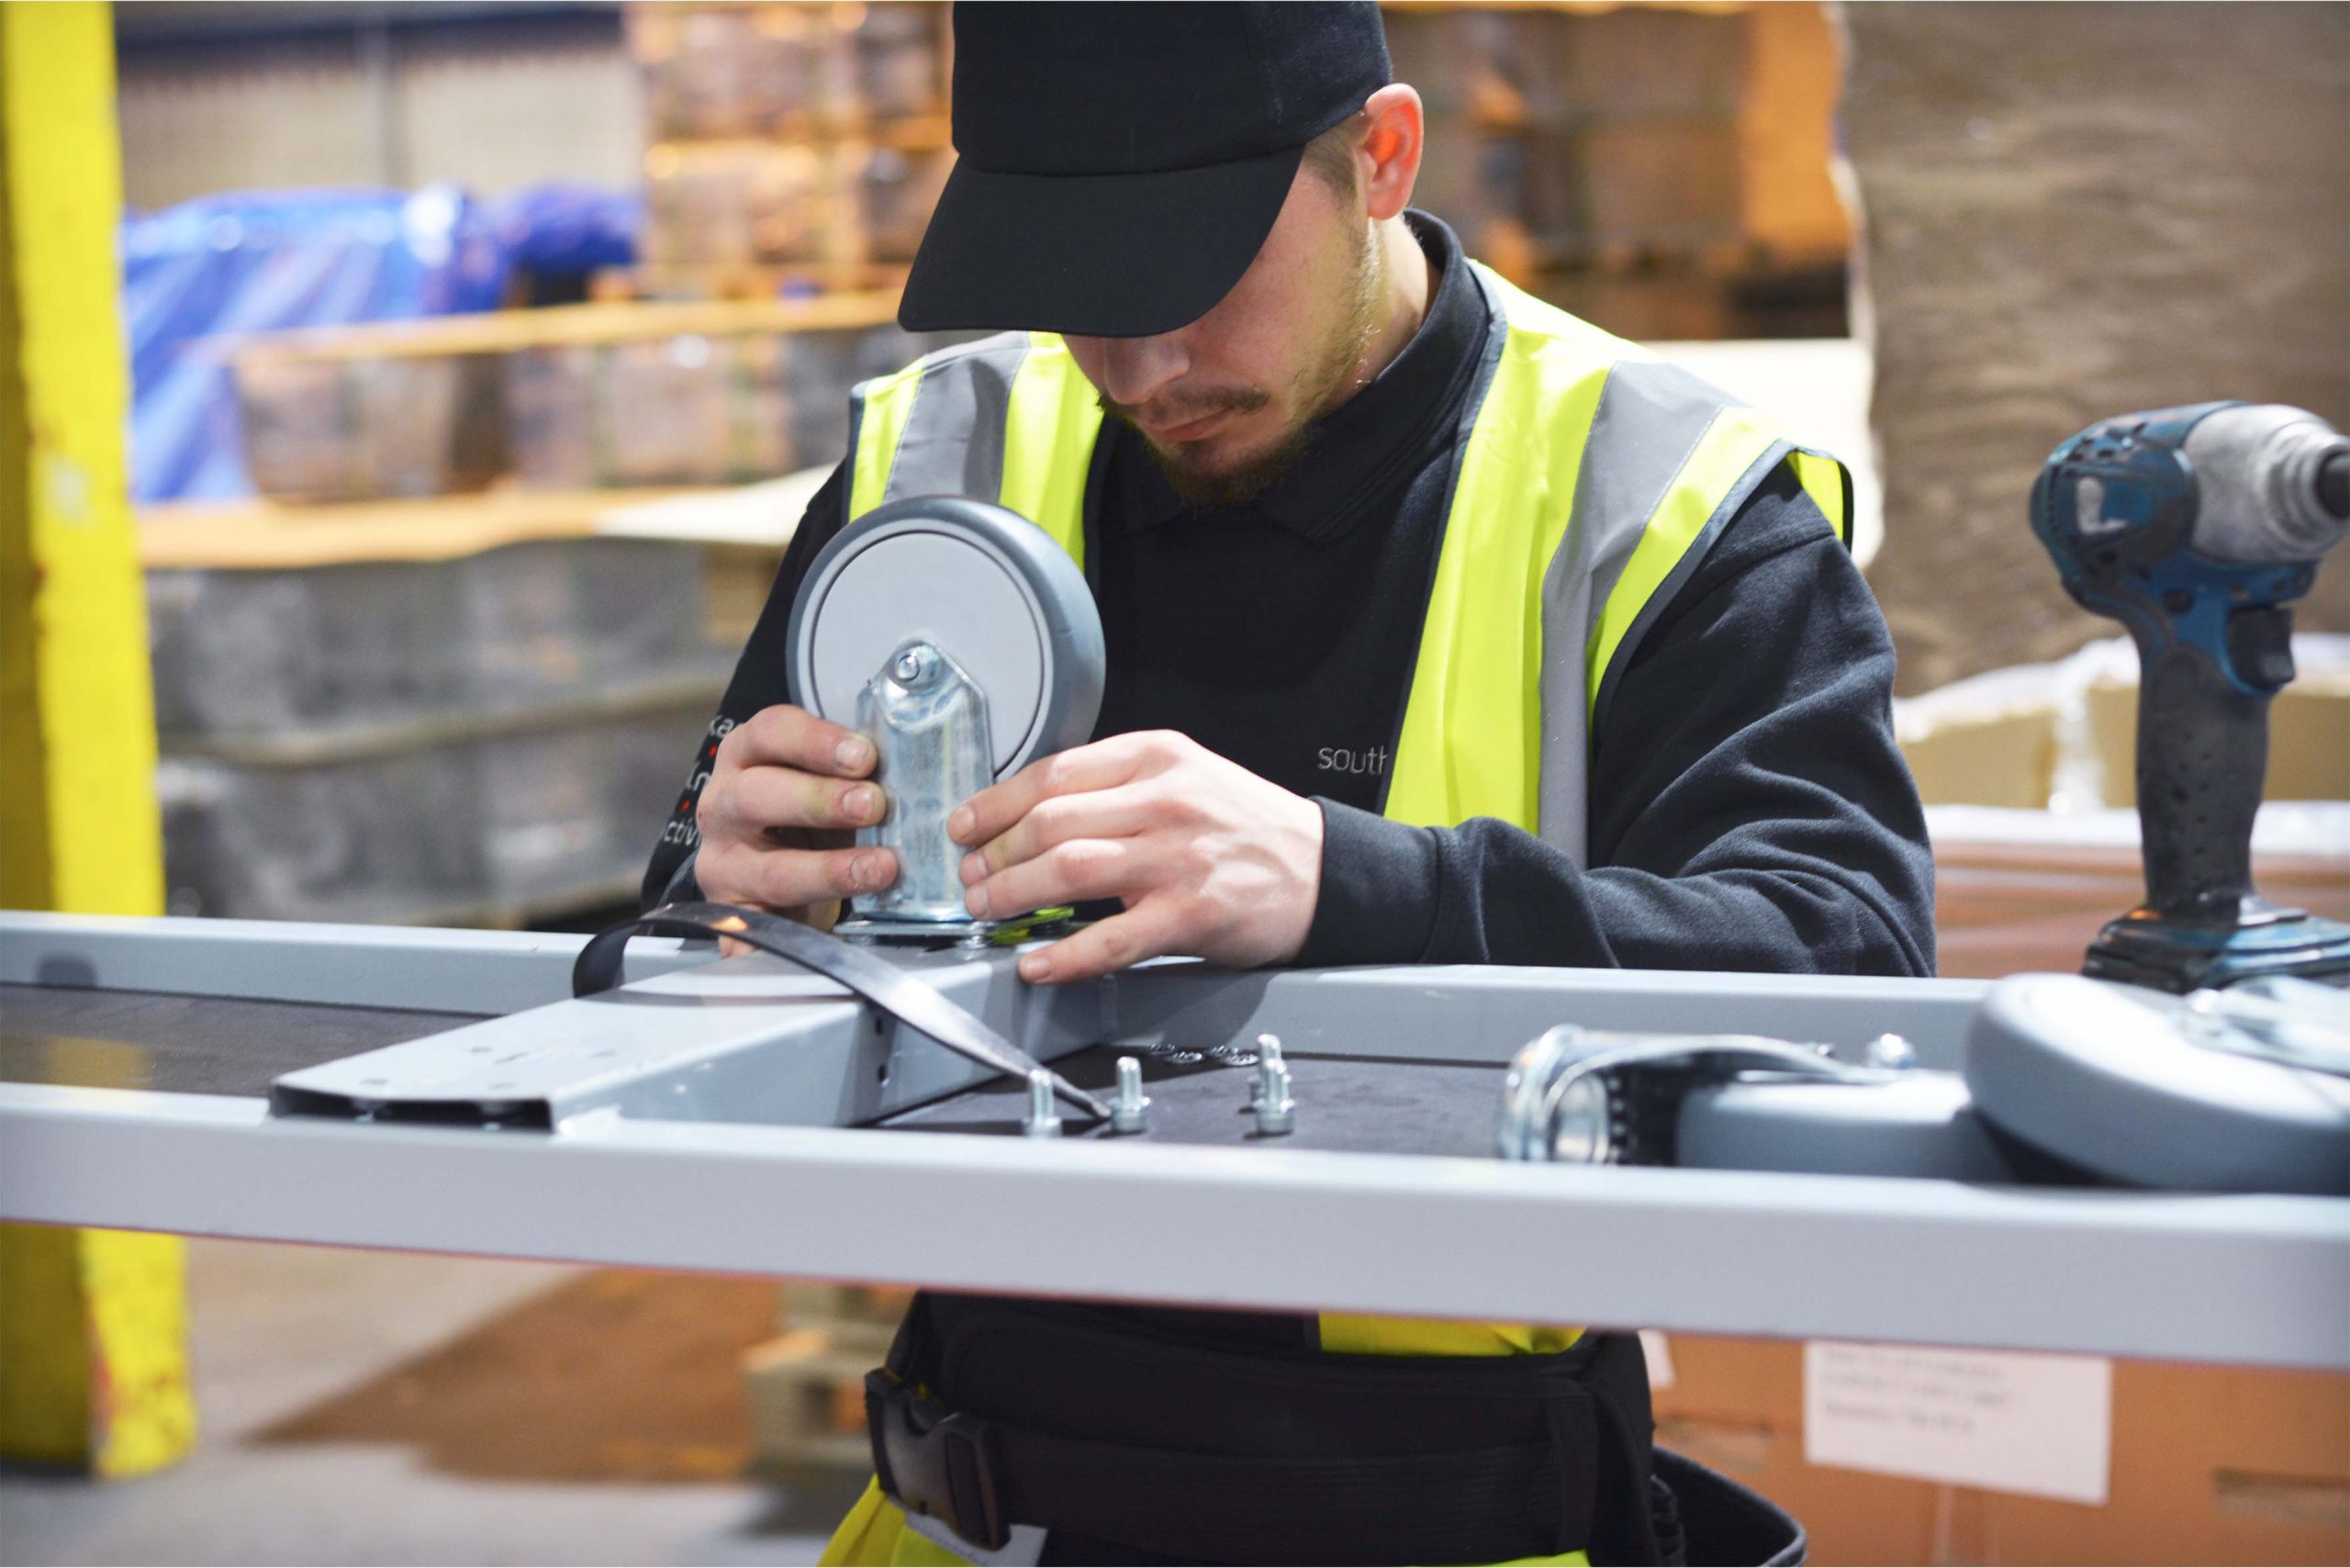 Why choose Southgate Technical Services?